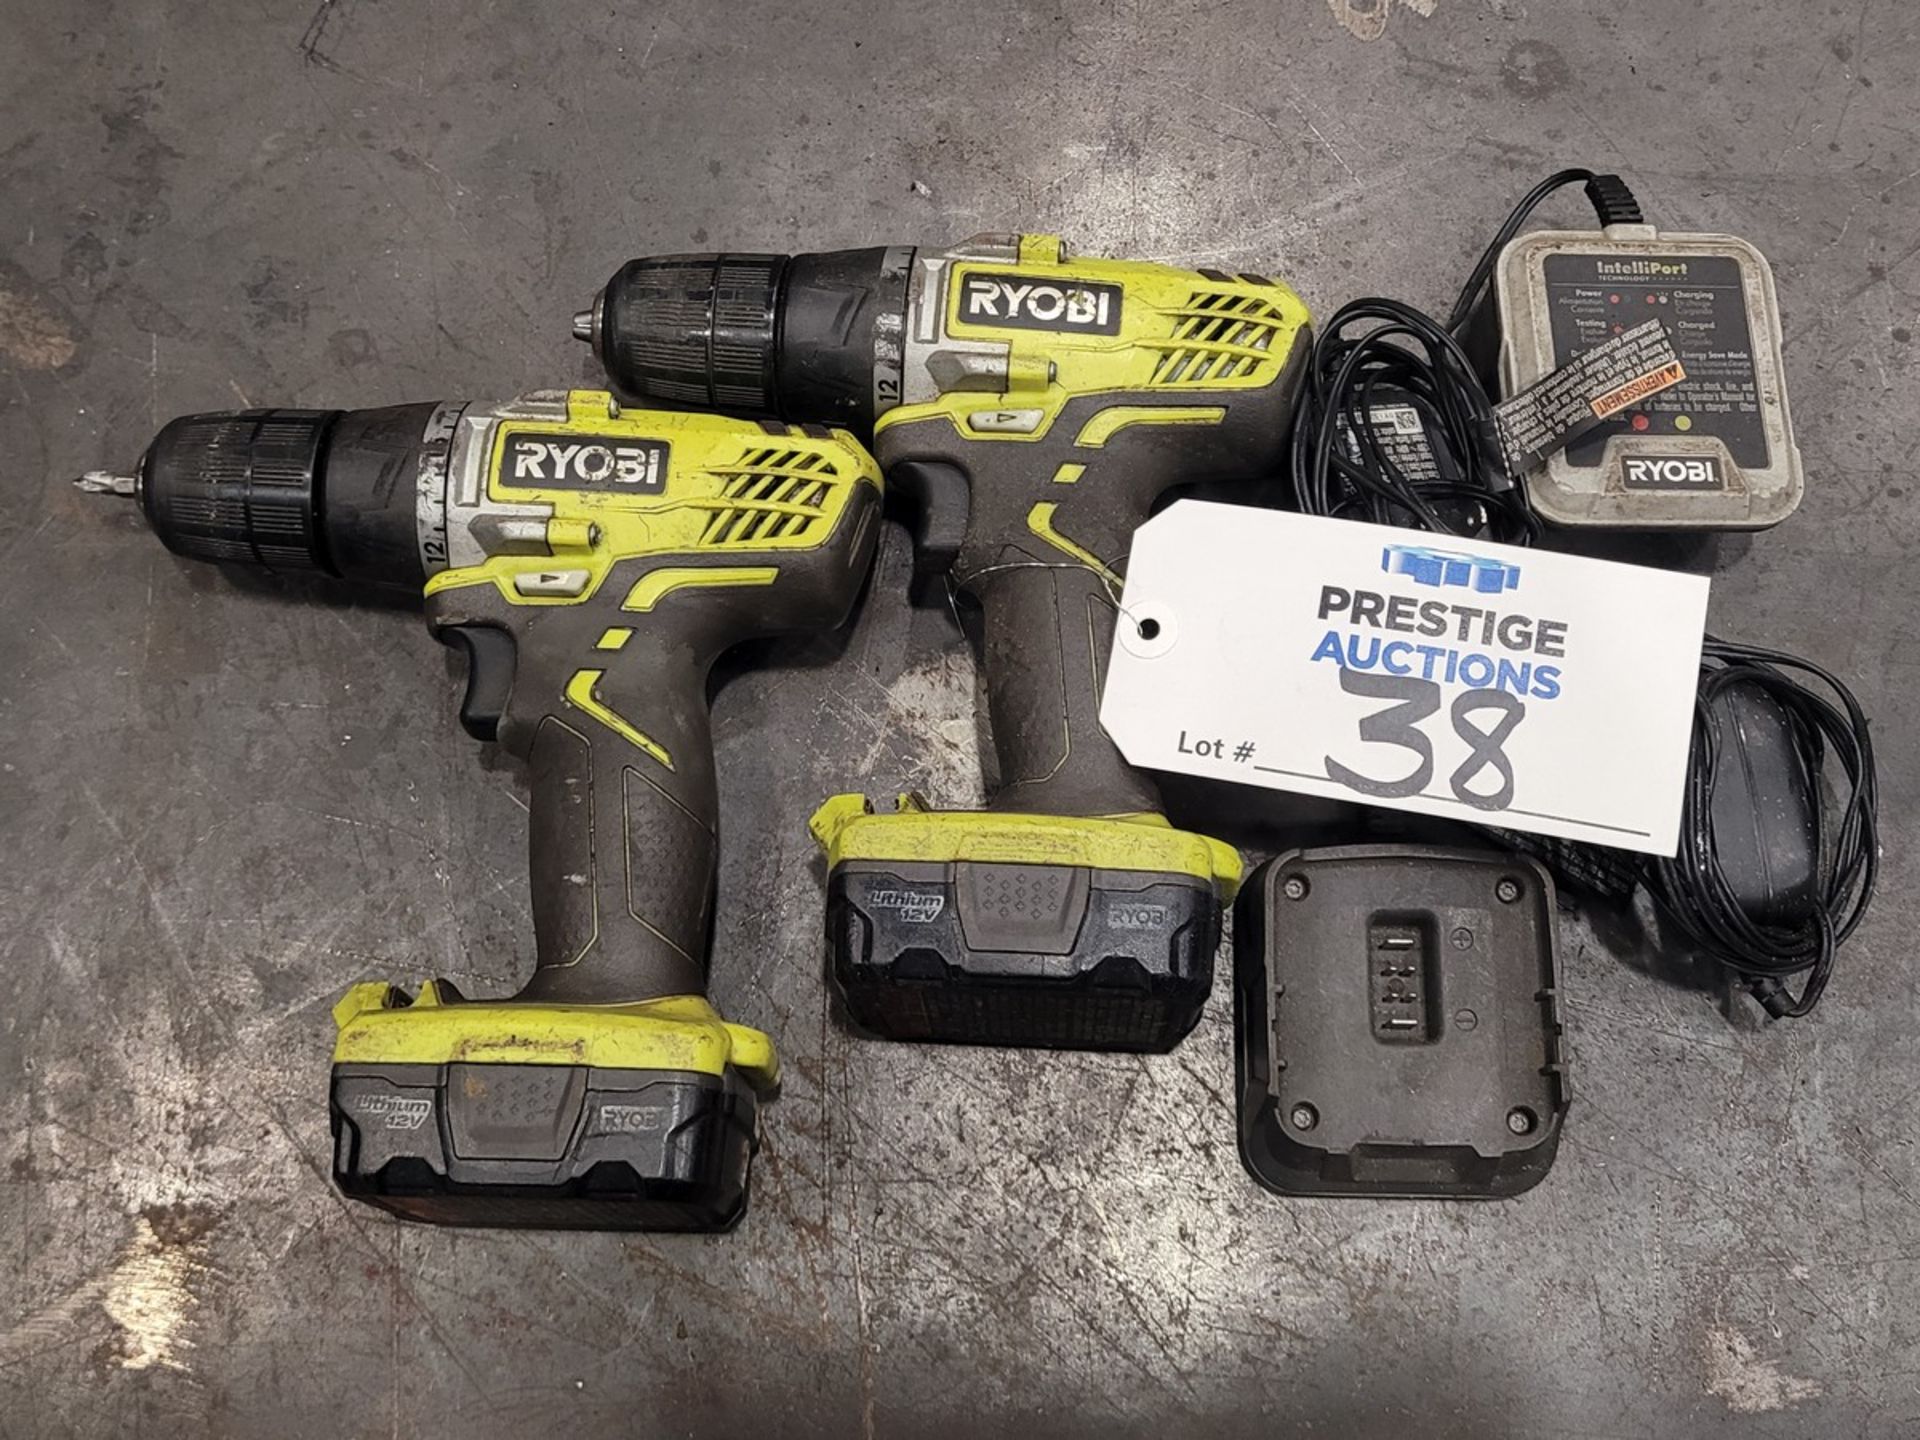 (2) Ryobi HJP003 12V Cordless 3/8" Drive VSR Drills with Battery Chargers